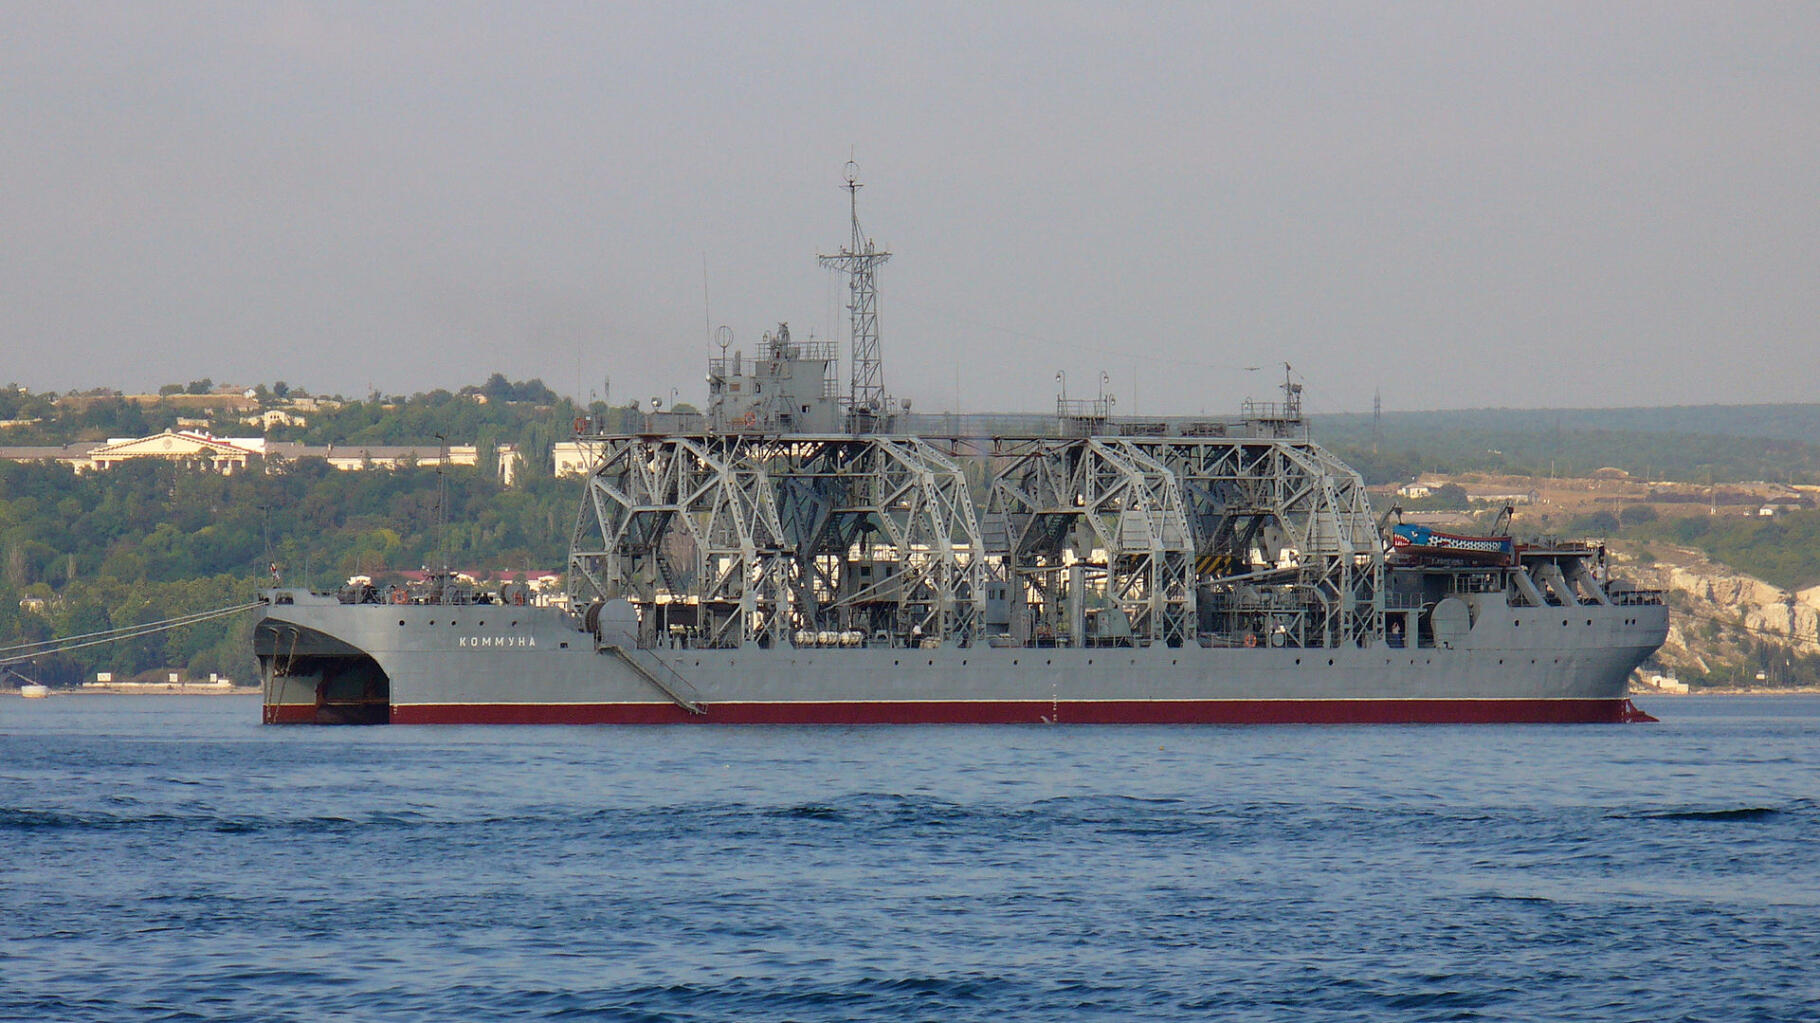 Ukraine attacked the most iconic Russian warship in Crimea, Komauna